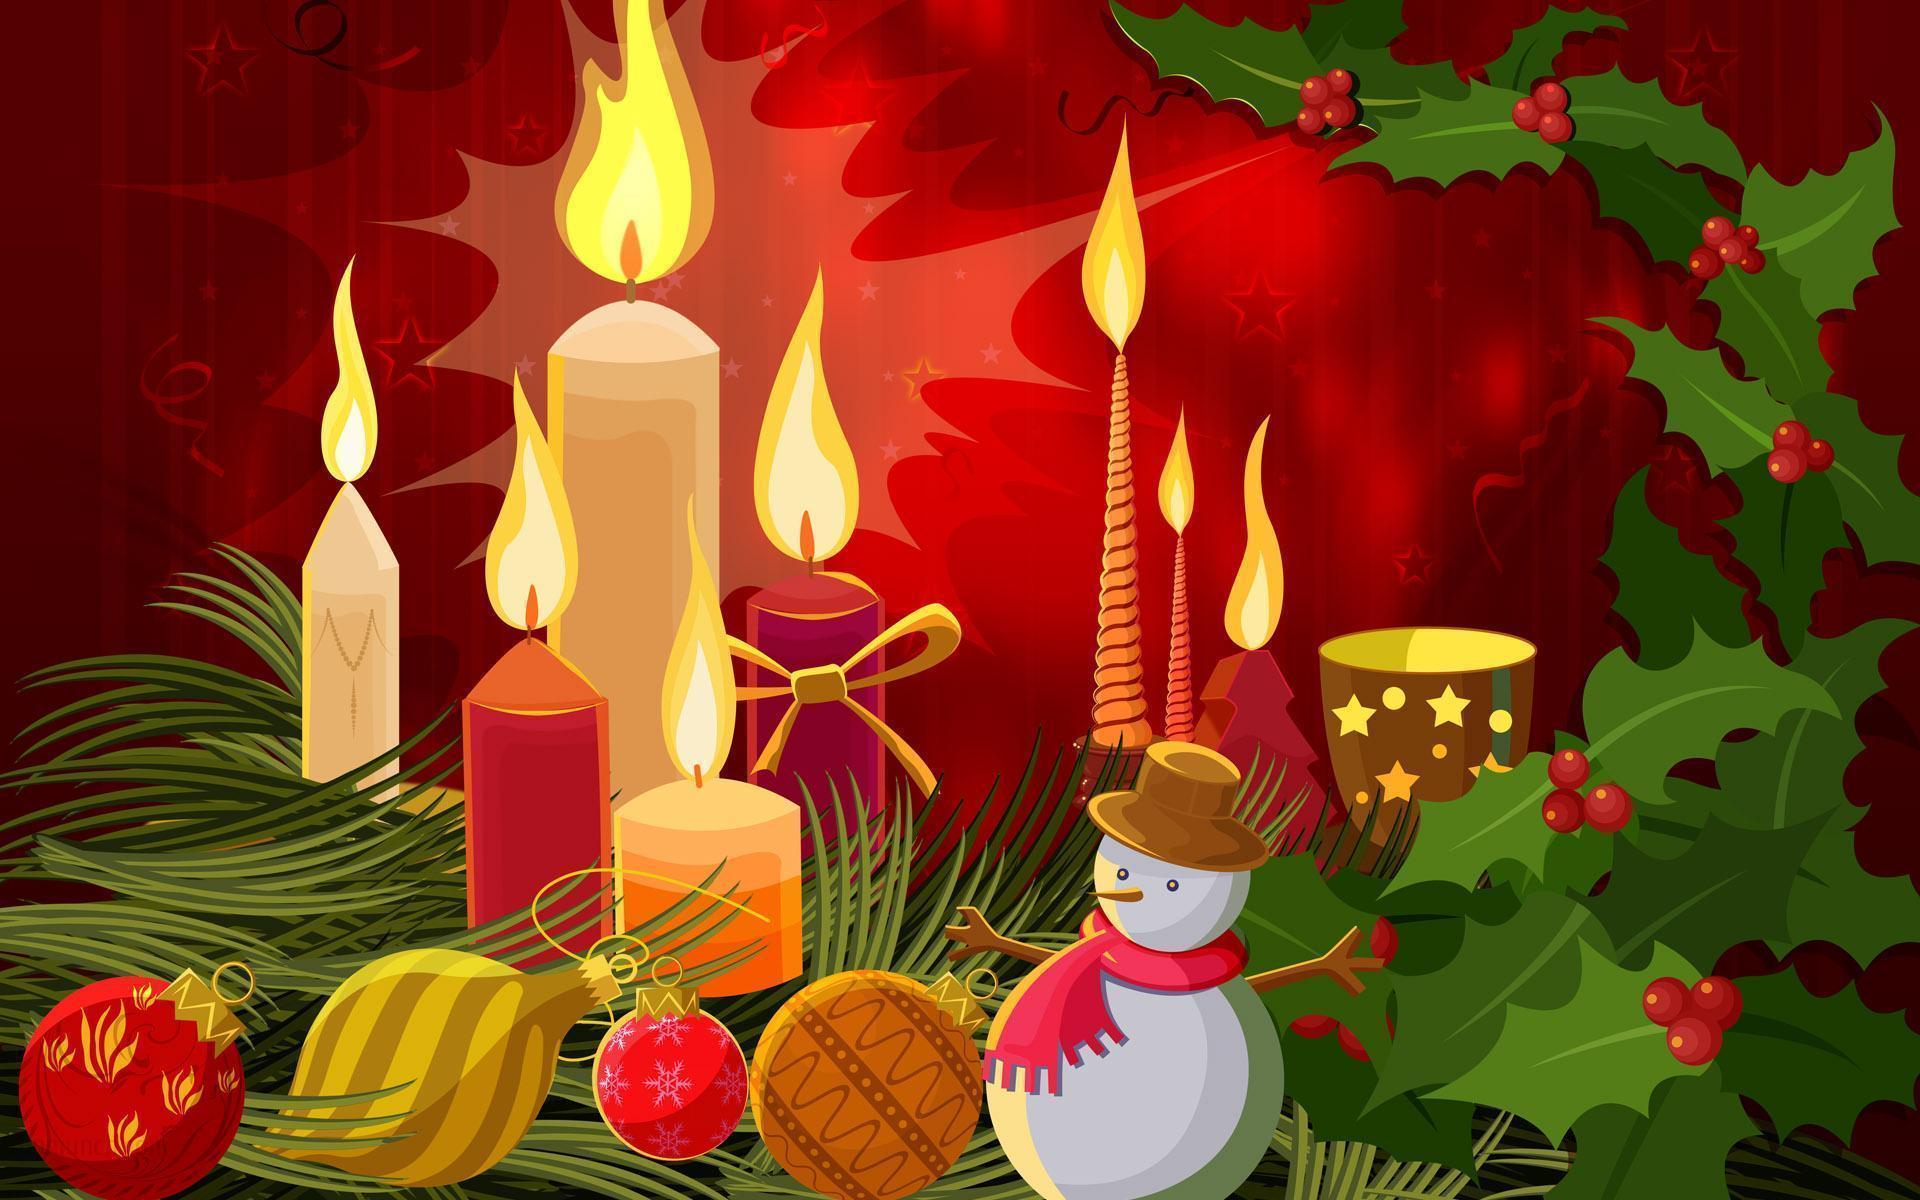 Staggering Free Holiday Wallpapers Screensavers 1920x1200PX